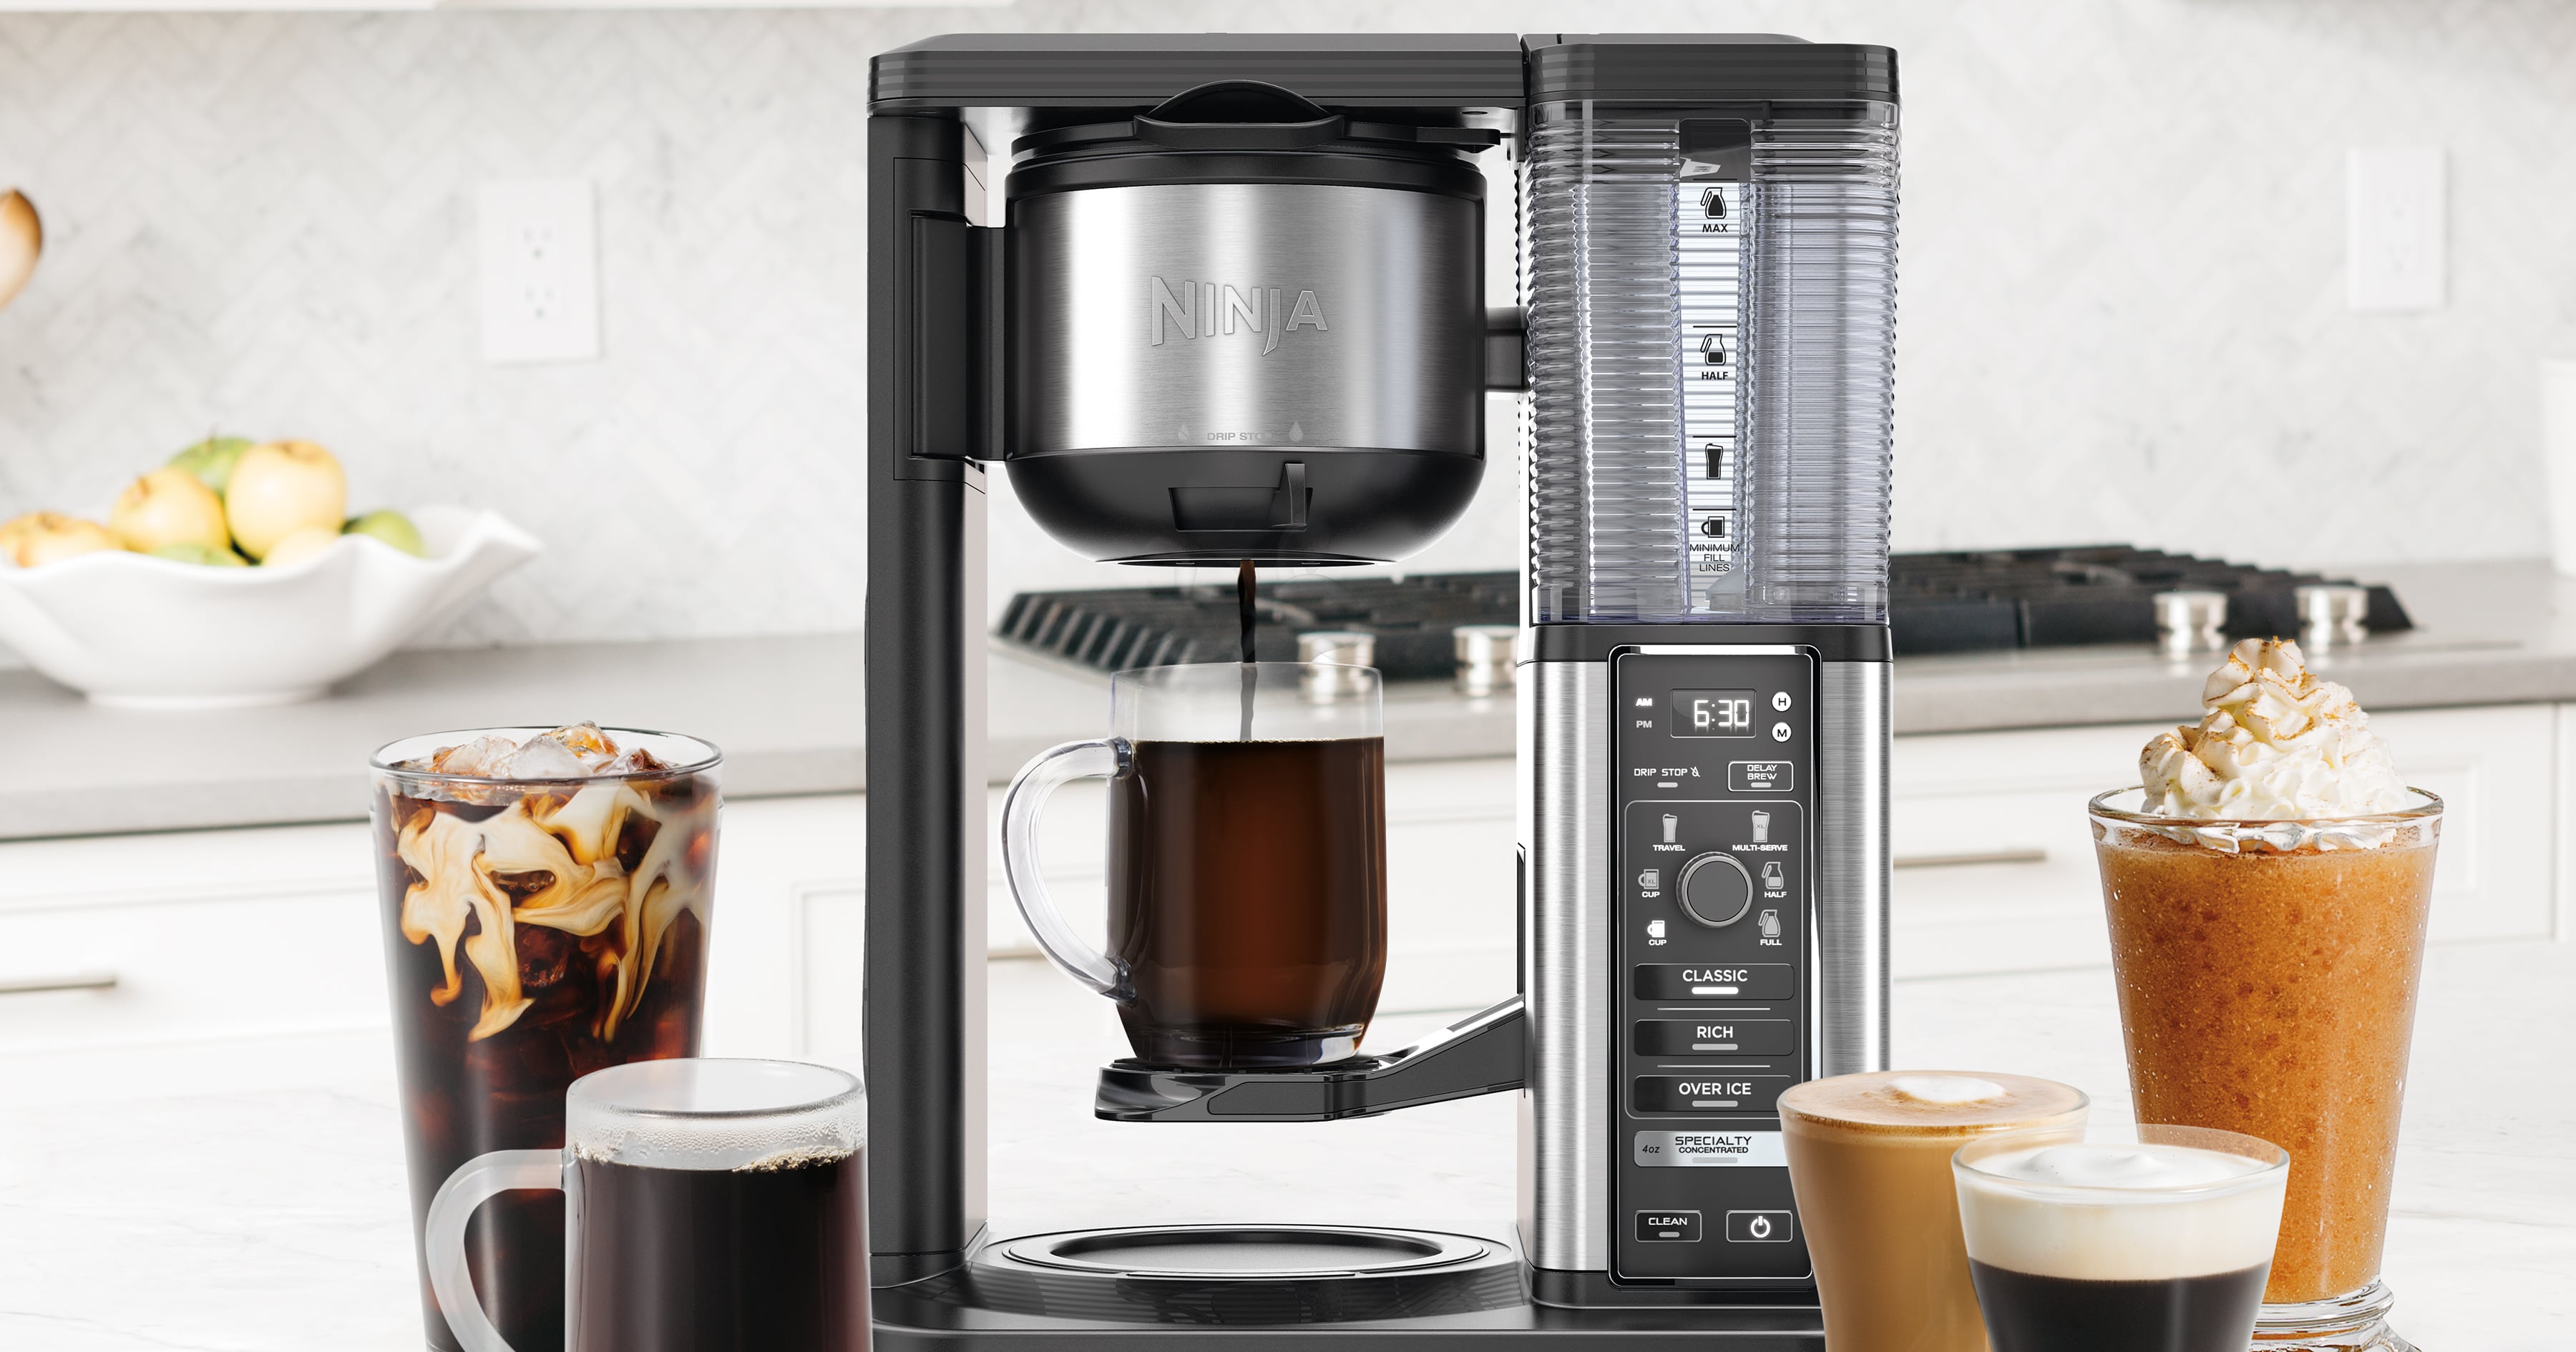 Review: Ninja Specialty Coffee Maker brings cafe-quality home